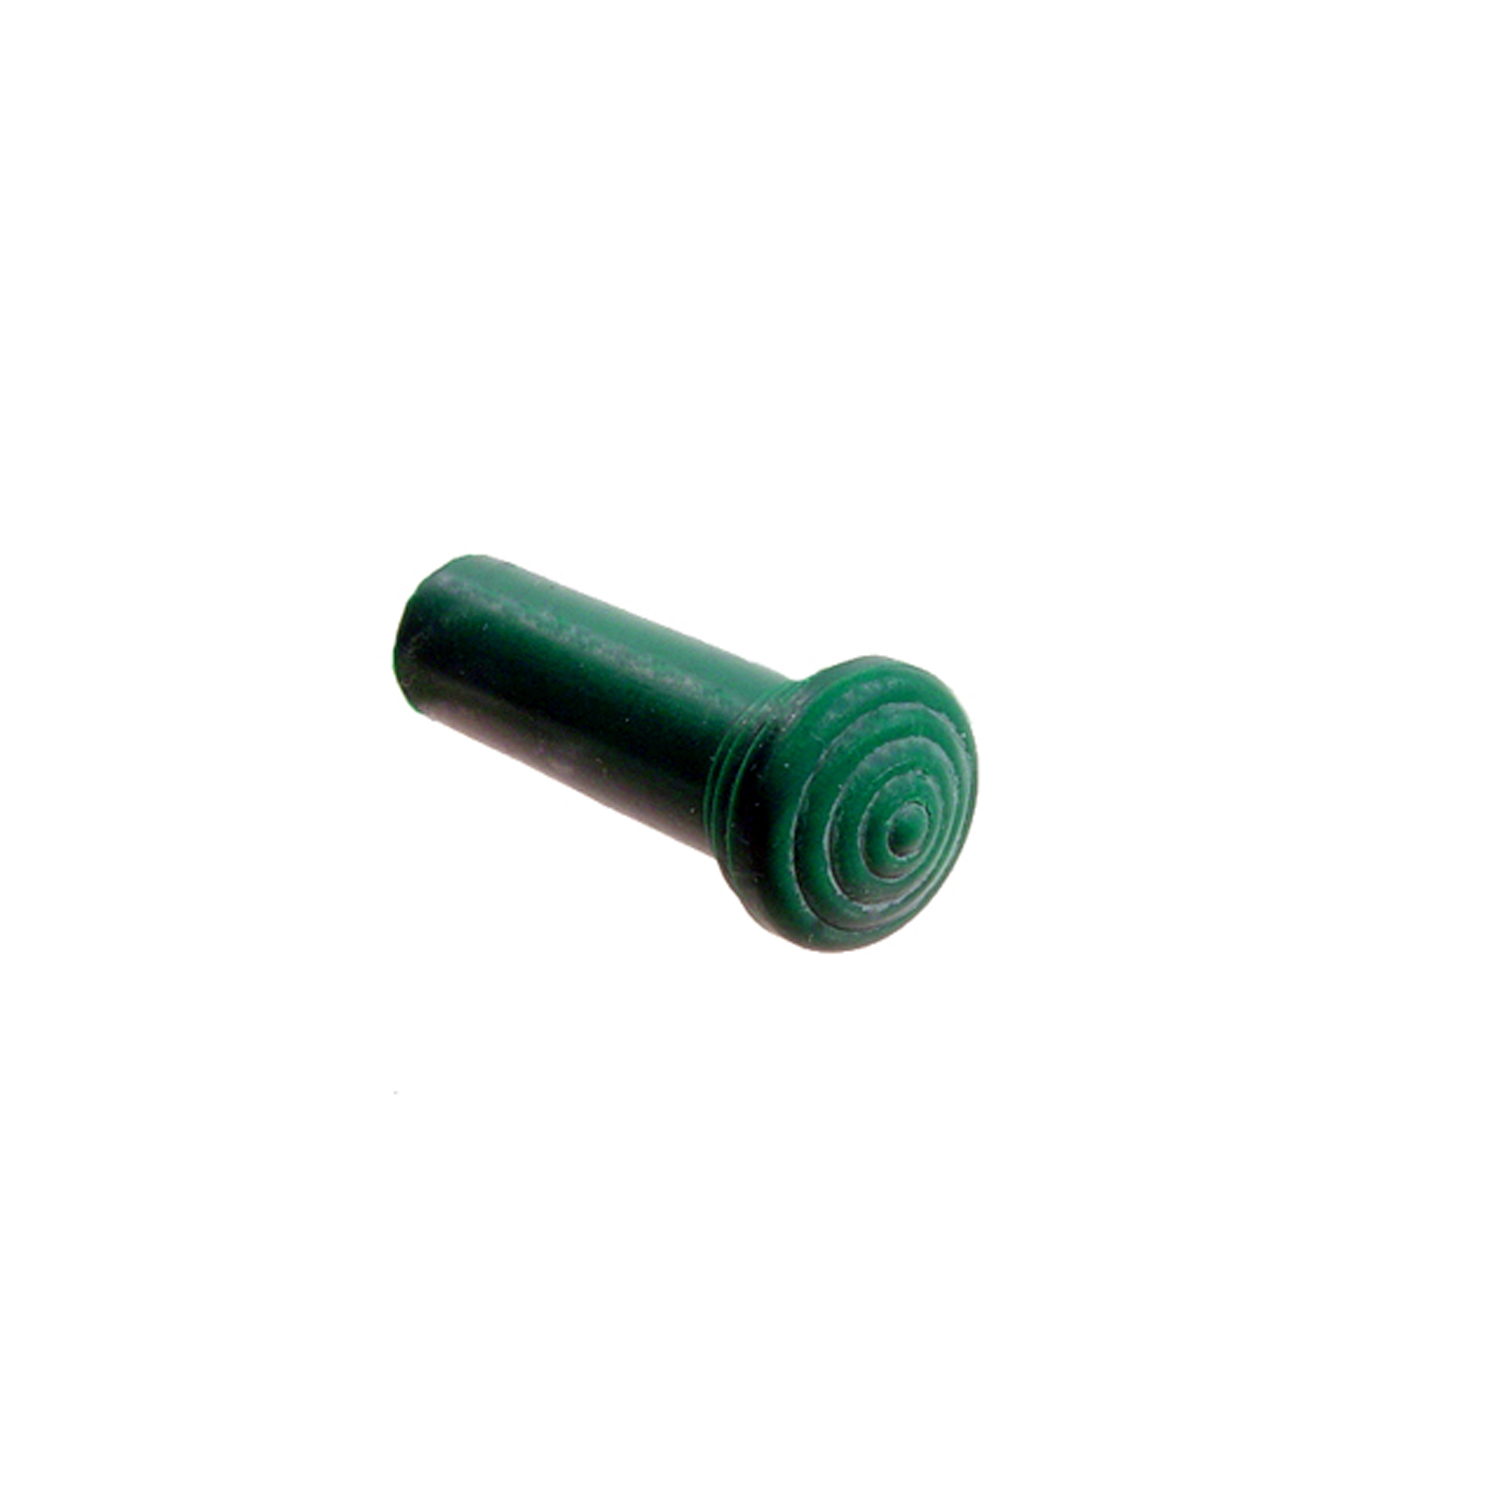 1947 Cadillac Series 62 Door Lock Knob.  Made of Teal Green rubber, self-threading-RP 304-M